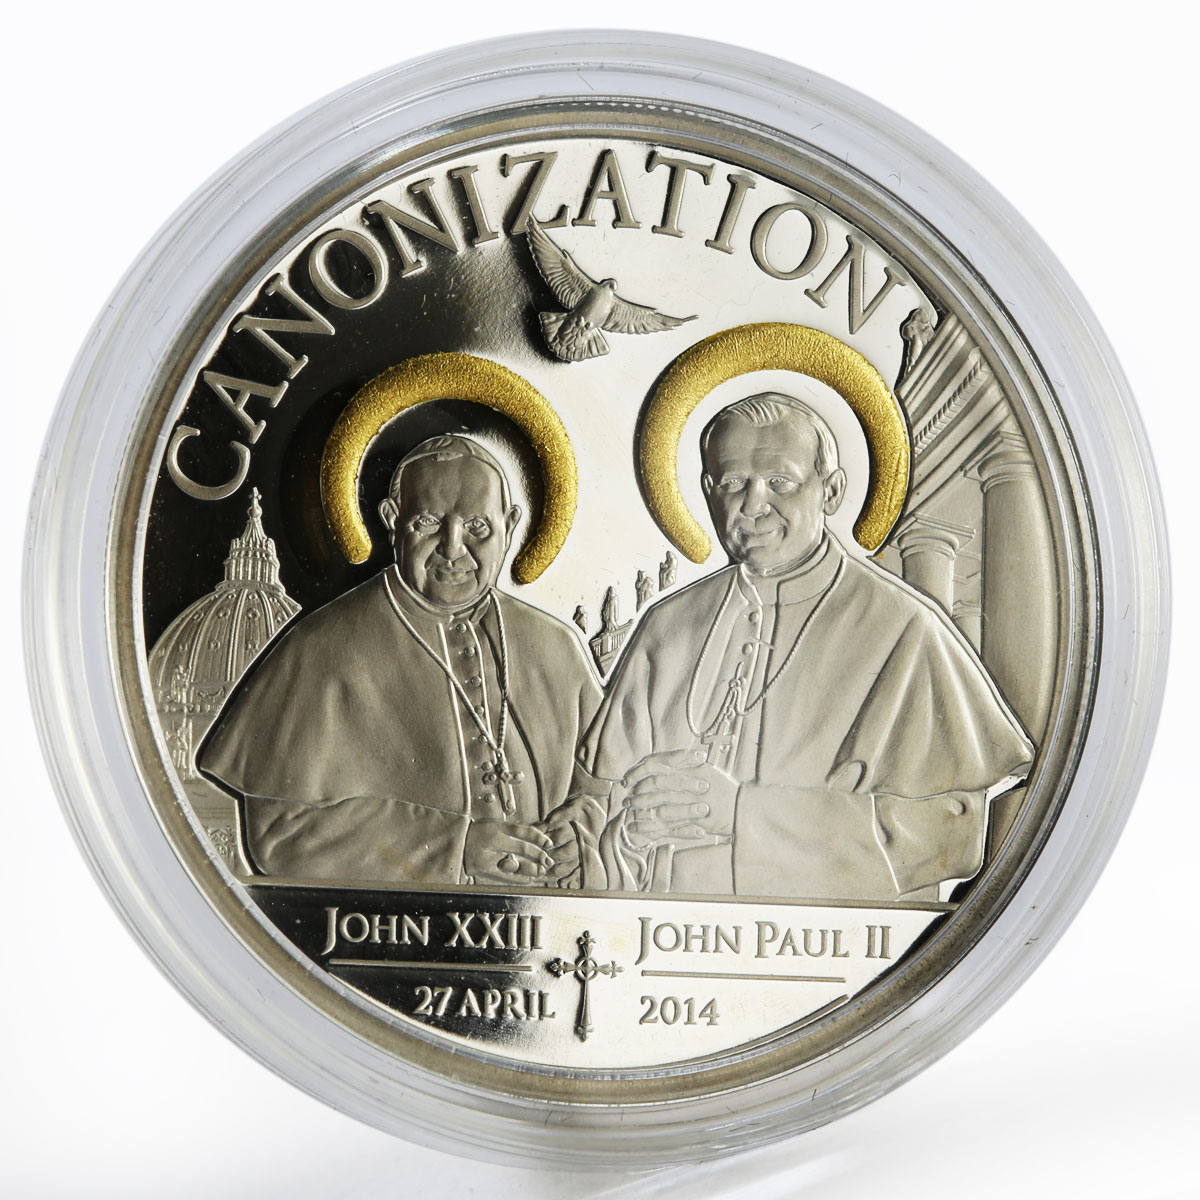 Tanzania 1000 shillings Canonization of Popes gilded silver proof coin 2014